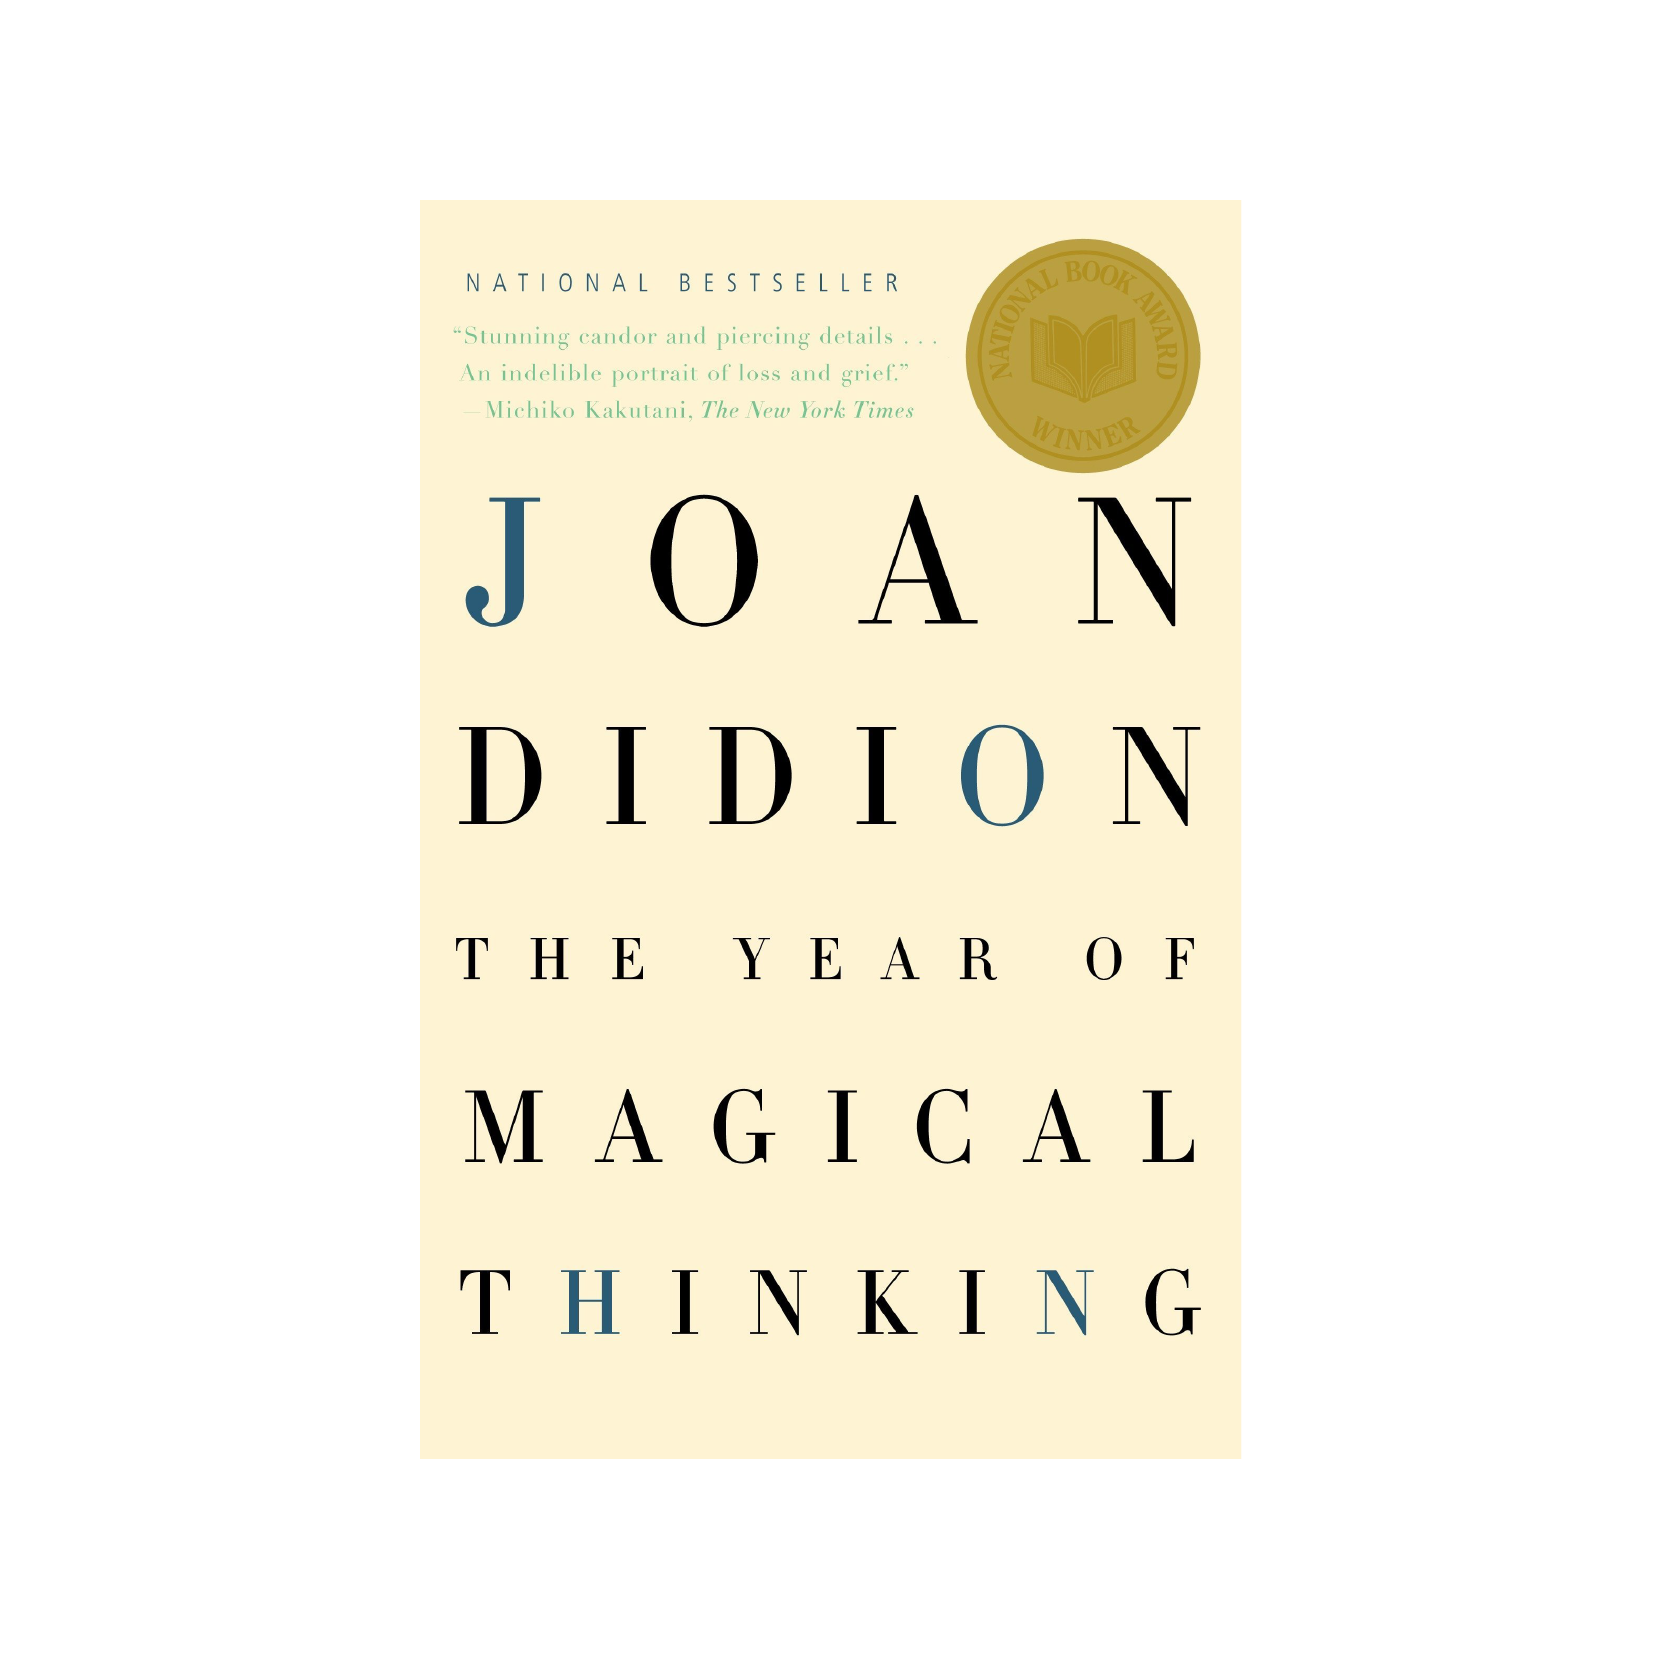 “Year of Magical Thinking” by Joan Didion